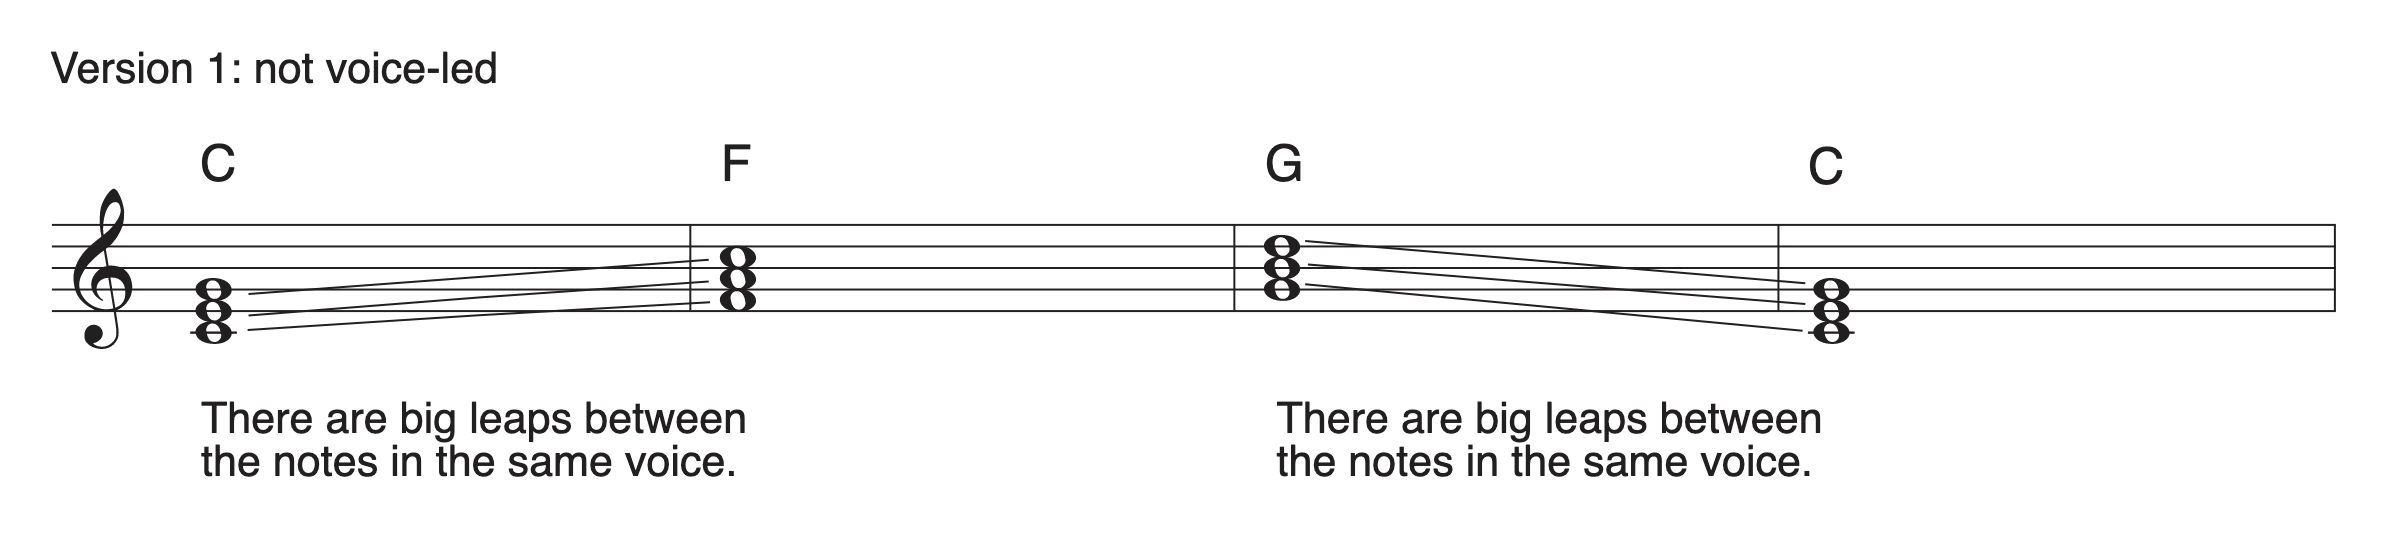 This music notation example shows a version of a chord progression that is NOT voice-led.